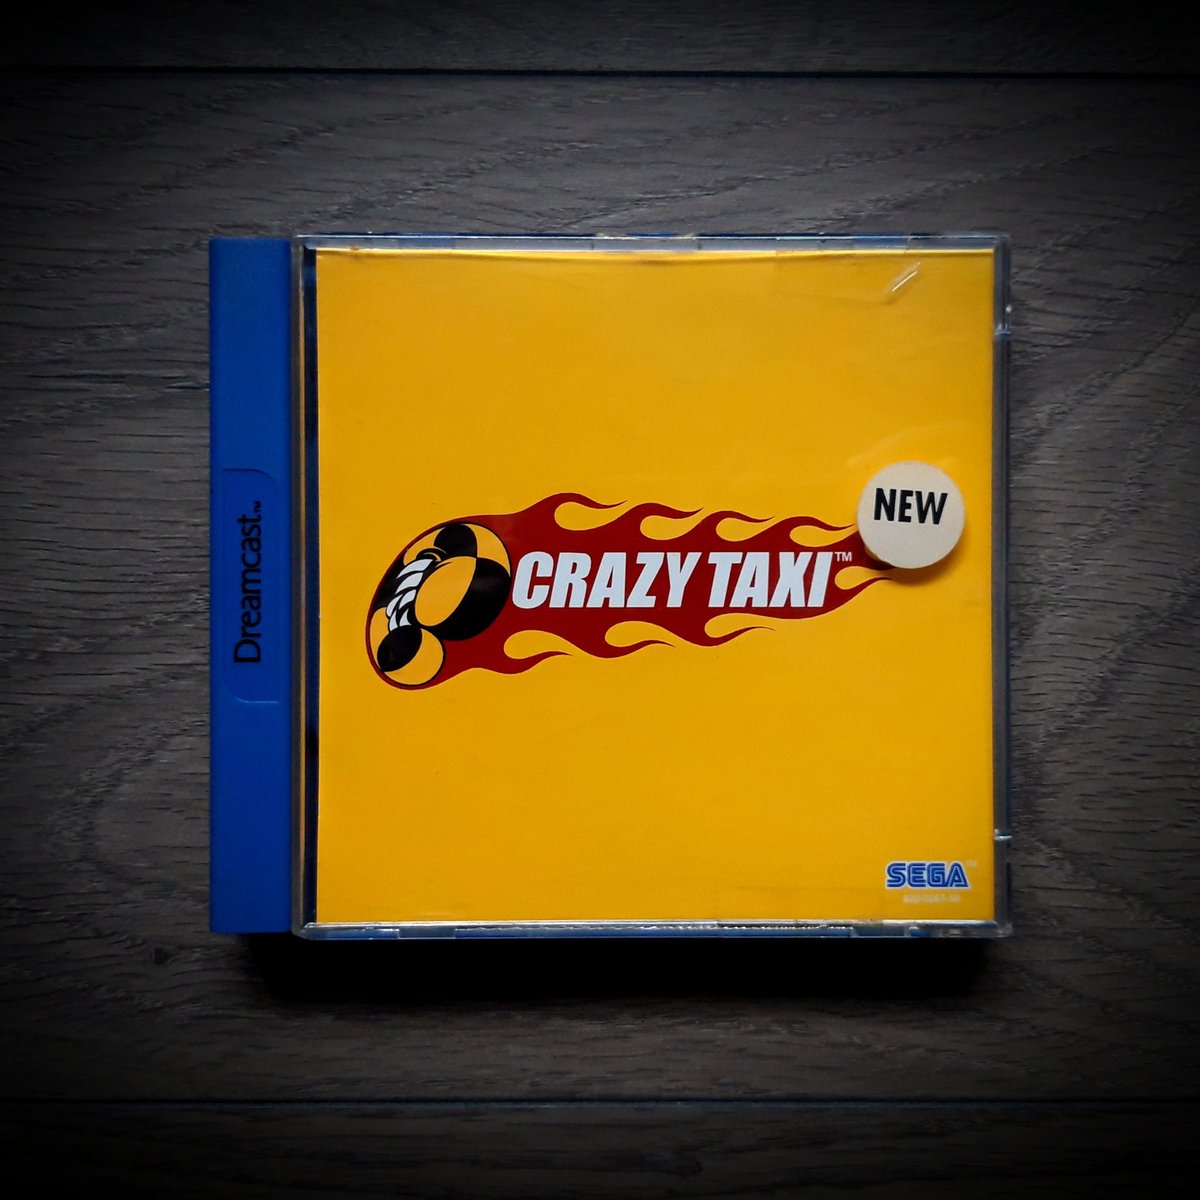 #Dreamcast was home to several groundbreaking games, all with unique style, engaging gameplay, excellent characters & that oh so #SEGA charm, but with such classics as #Shenmue, Jet Set or #Sonic Adventure, its difficult to pick a favourite, would you agree? We chose #CrazyTaxi